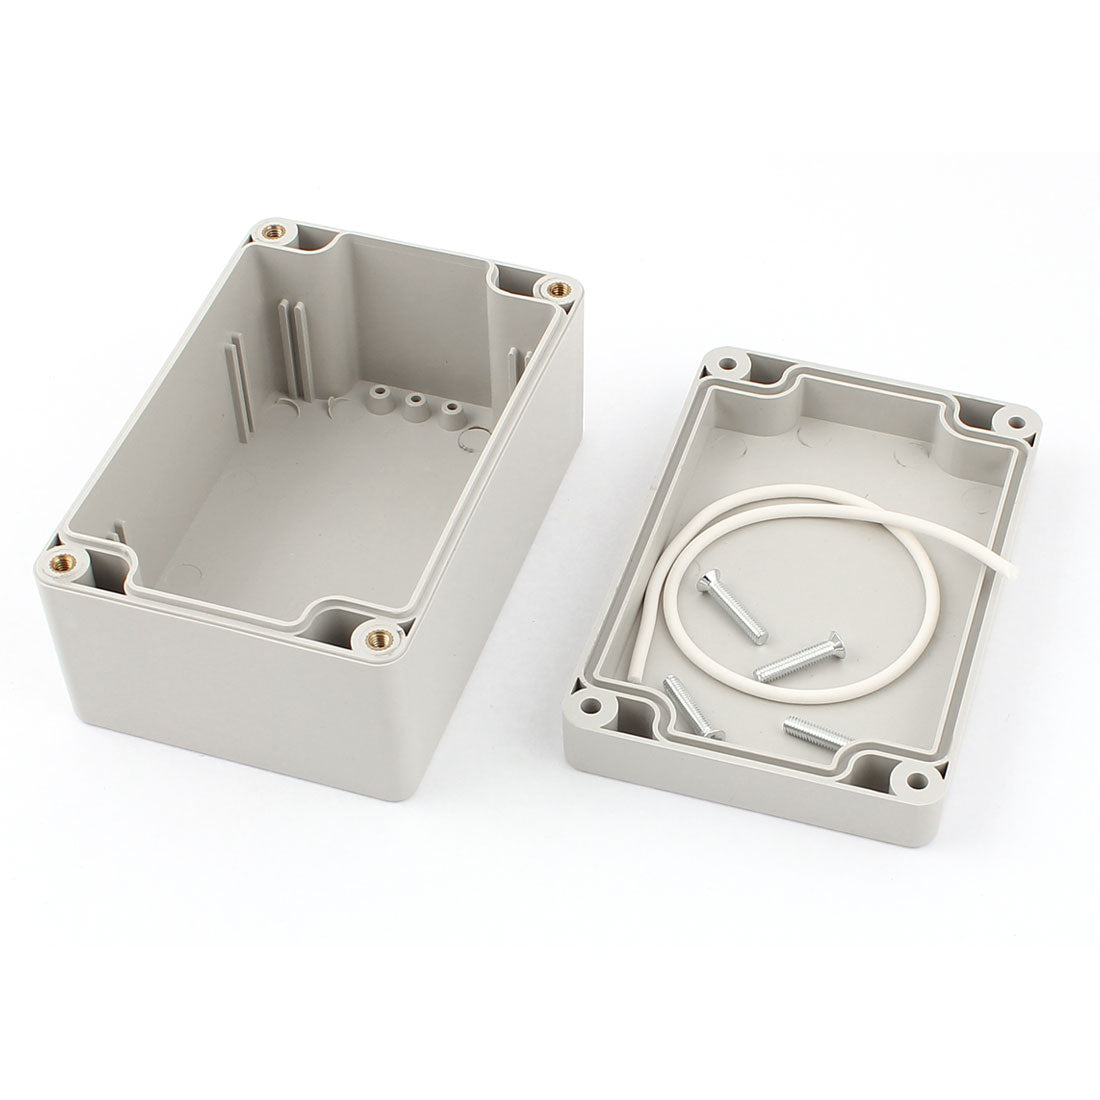 uxcell Uxcell Plastic Sealed Cable Connect Project Case Junction Box 120x80x60mm